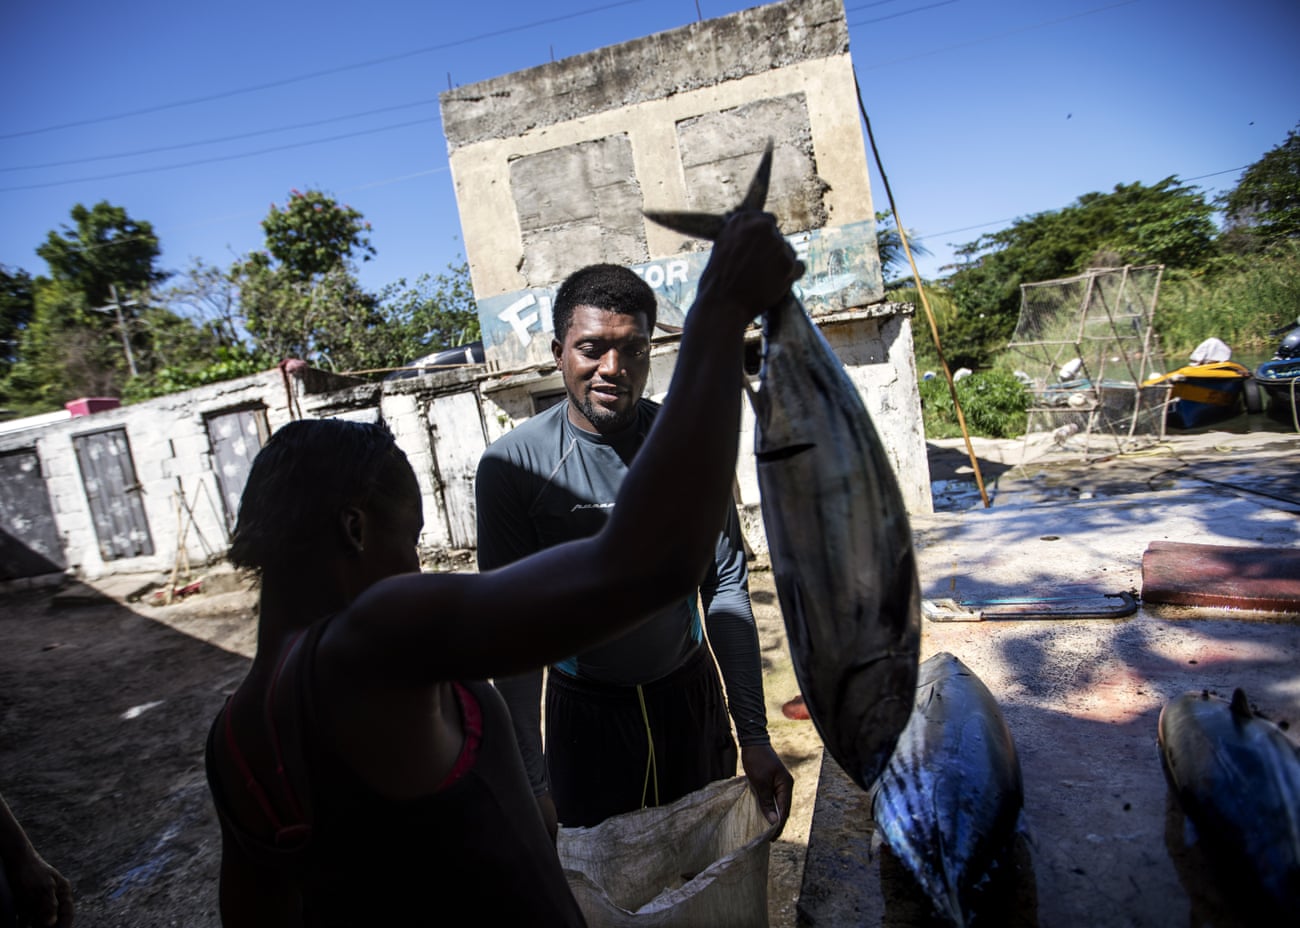 Spearfisherman Rick Walker, 35, sells his catch to a buyer at a fish market in White River